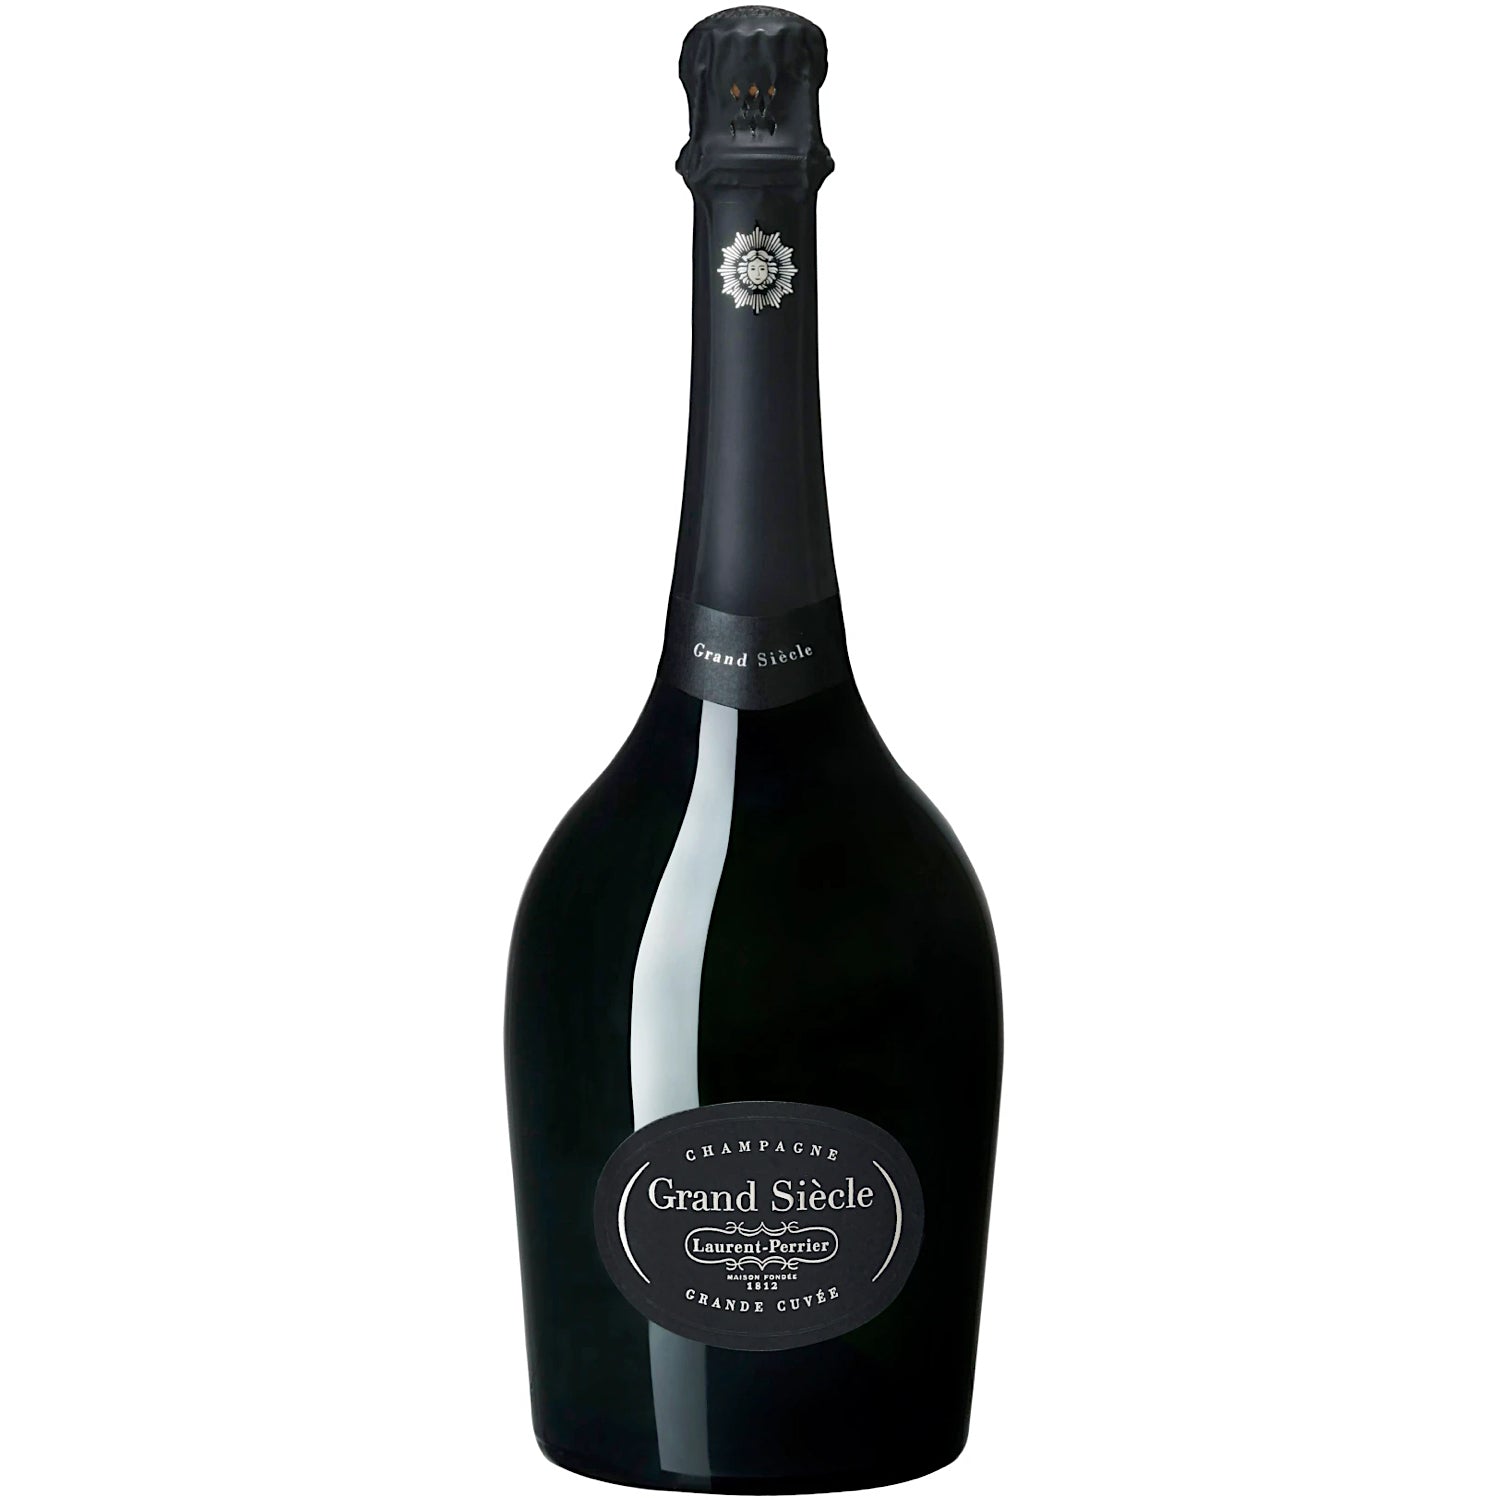 Champagne Laurent Perrier Grand Siècle [750ml]